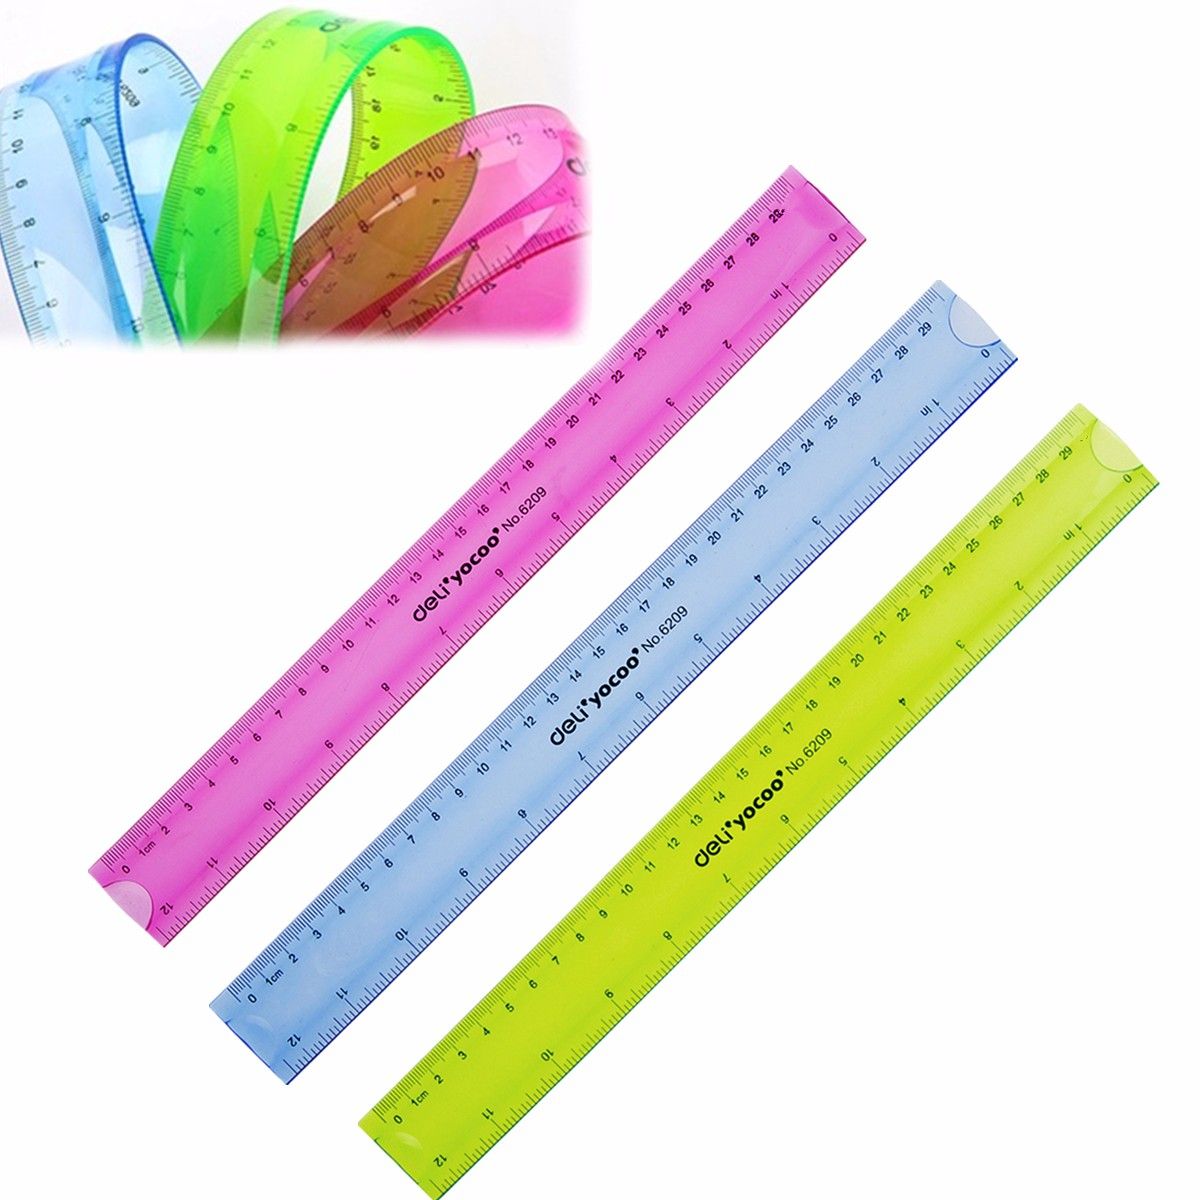 12quot-30cm-Super-Flexible-Ruler-Rule-Measuring-Tool-Stationery-for-Office-School-1031322